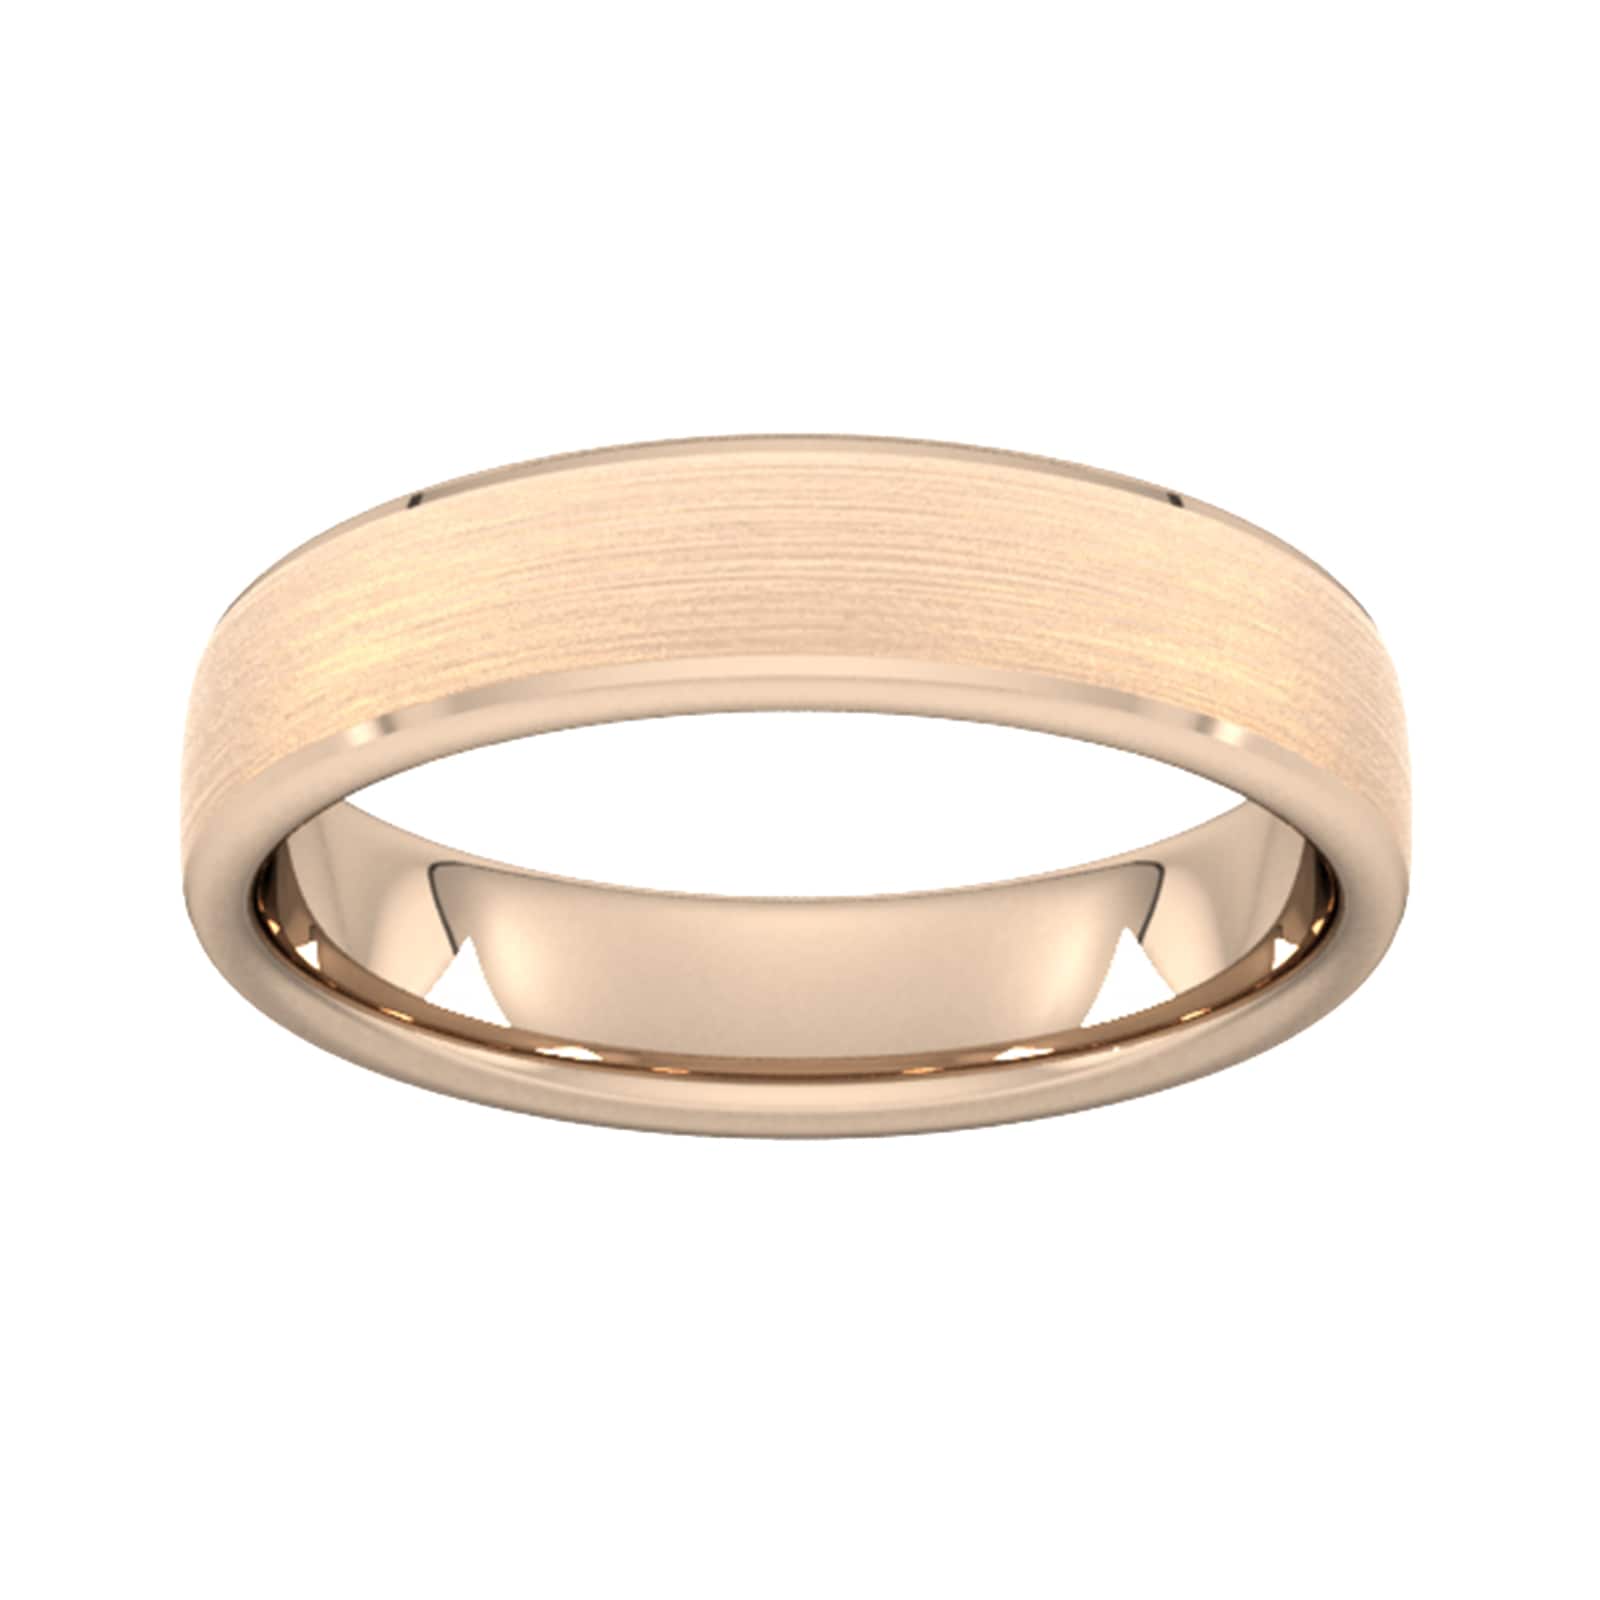 5mm Slight Court Heavy Polished Chamfered Edges With Matt Centre Wedding Ring In 18 Carat Rose Gold - Ring Size K